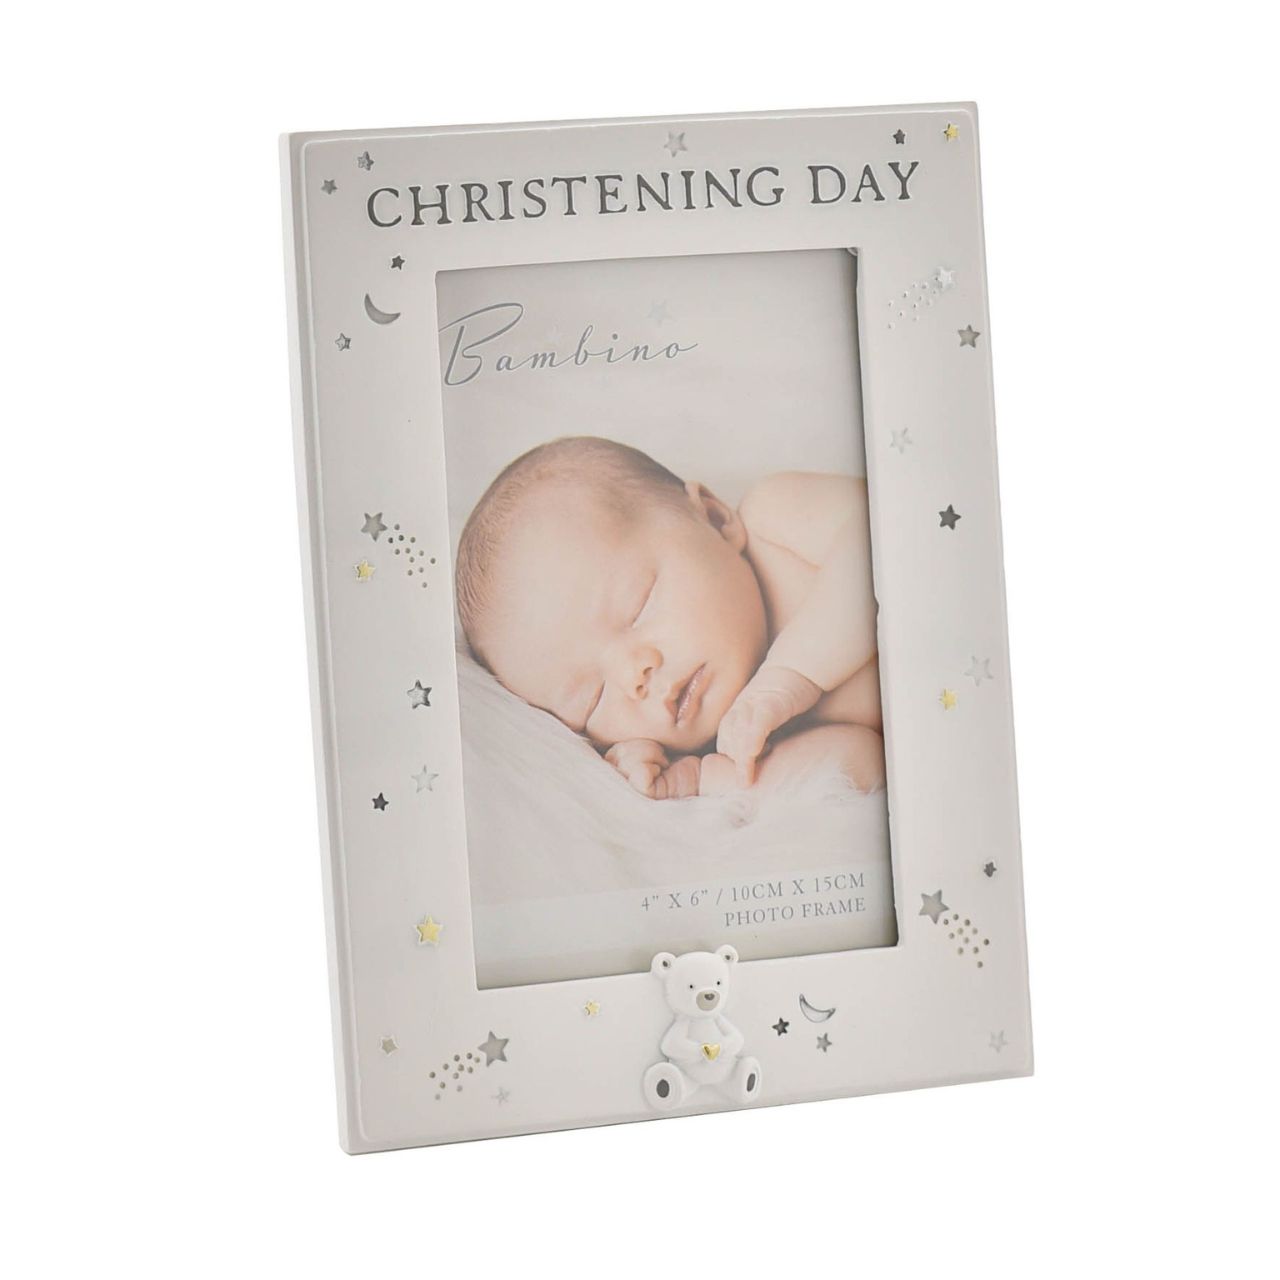 Bambino Resin Christening Day Photo Frame 4" x 6"  Celebrate your beautiful new addition with this 6" x 4" 'Christening Day' photo frame. From BAMBINO BY JULIAN - a timeless collection to suit the dedication of a new-born's future to faith and morality.